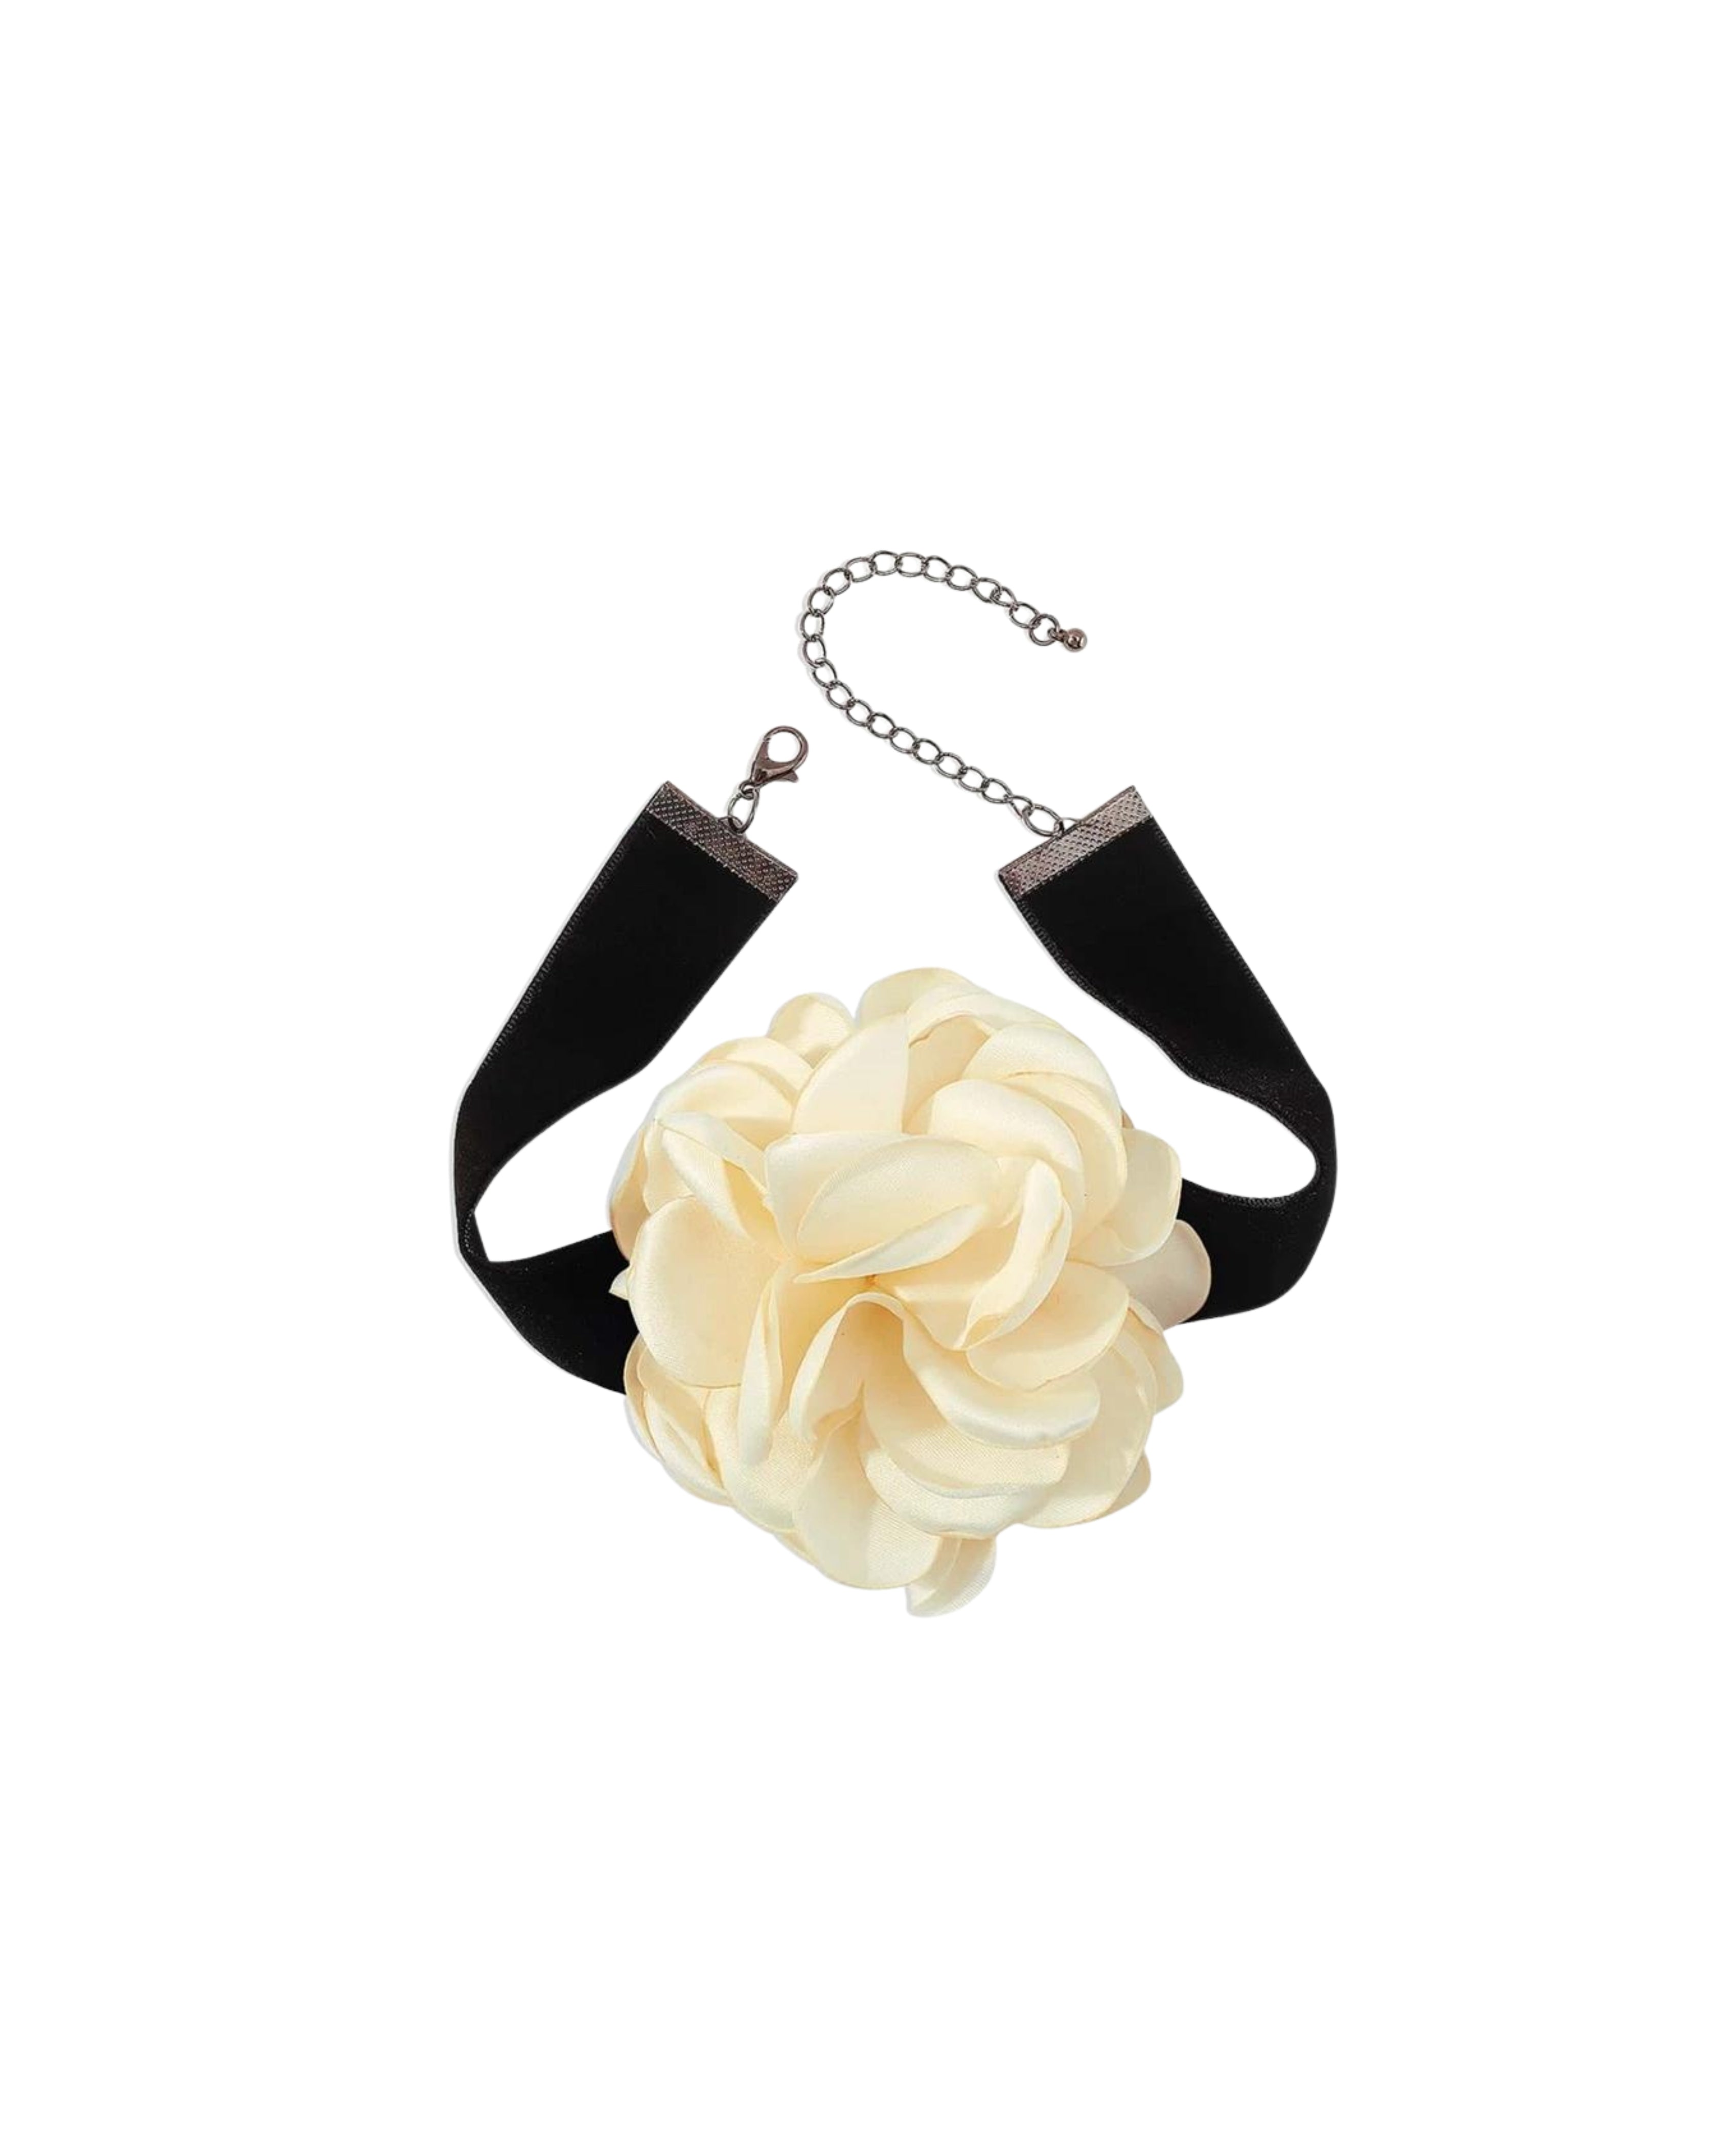 THE HARRY INSPIRED CORSAGE FLOWER CHOKER - LIGHT - EXCLUSIVE Jewellery from HEYIAMINHATELOVE - Just $10.00! SHOP NOW AT IAMINHATELOVE BOTH IN STORE FOR CYPRUS AND ONLINE WORLDWIDE